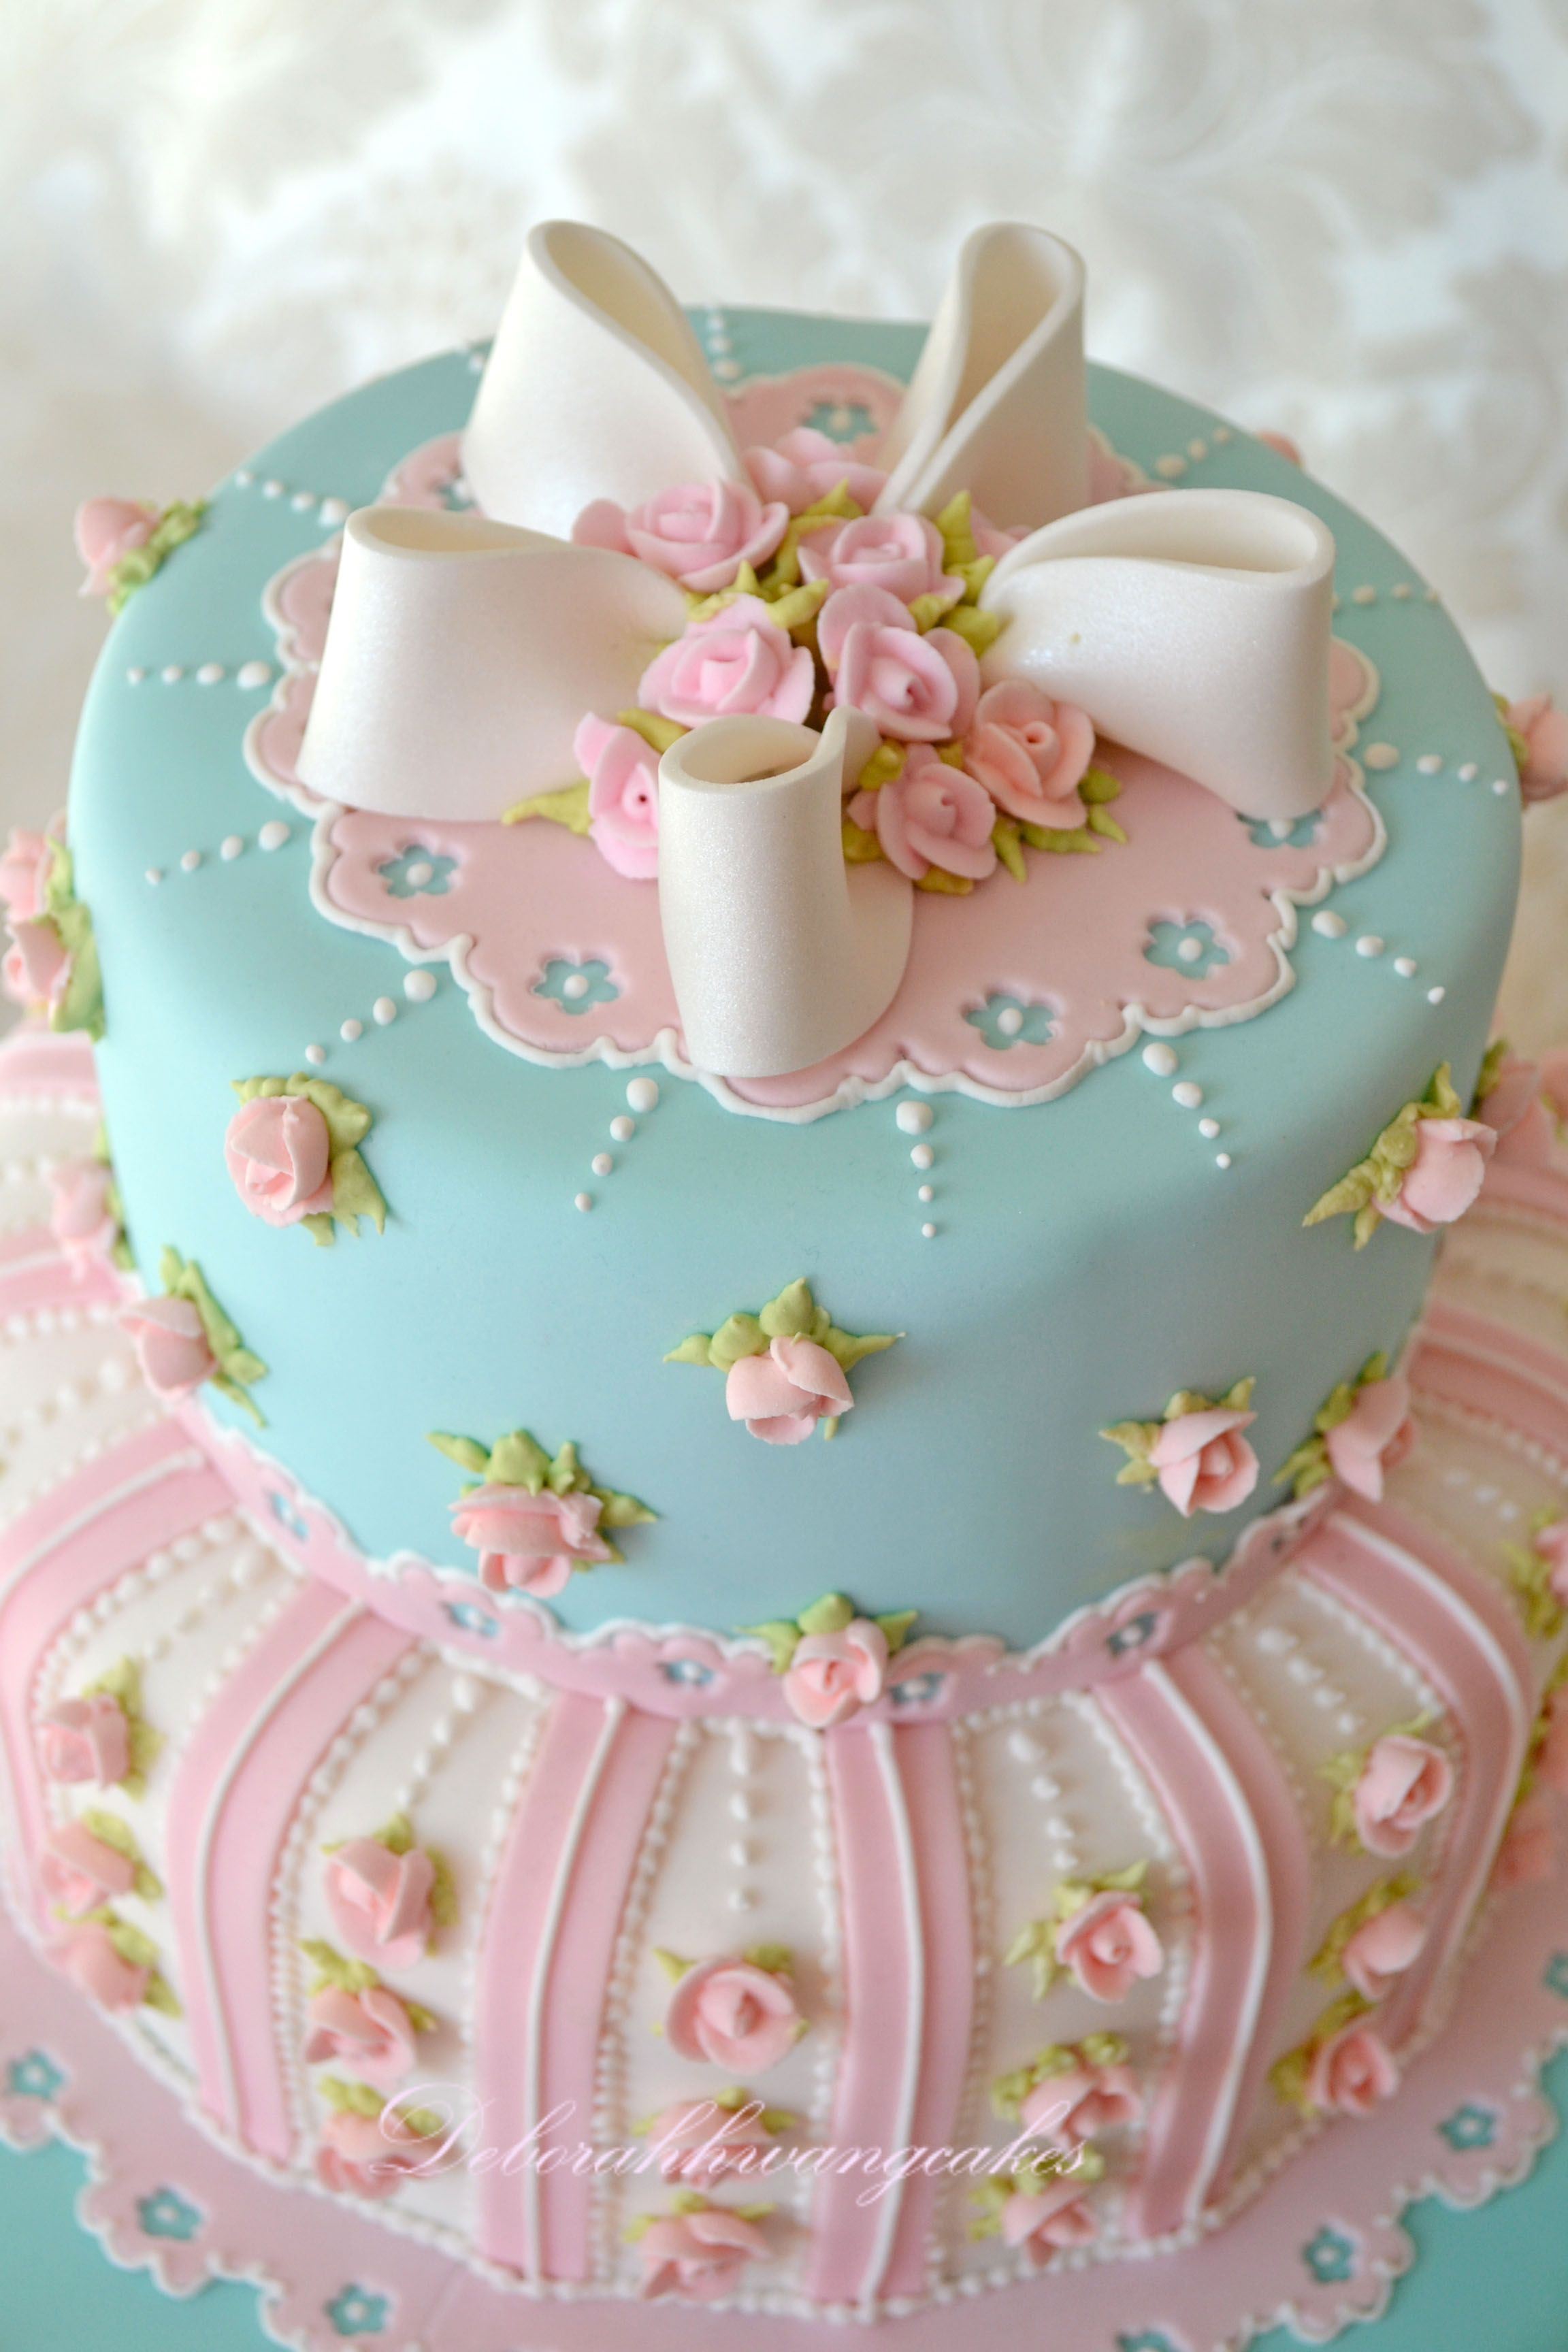 Birthday Cakes For Ladies This Cake For A Girls Birthday Or Tea Party Or If Its A Girl It